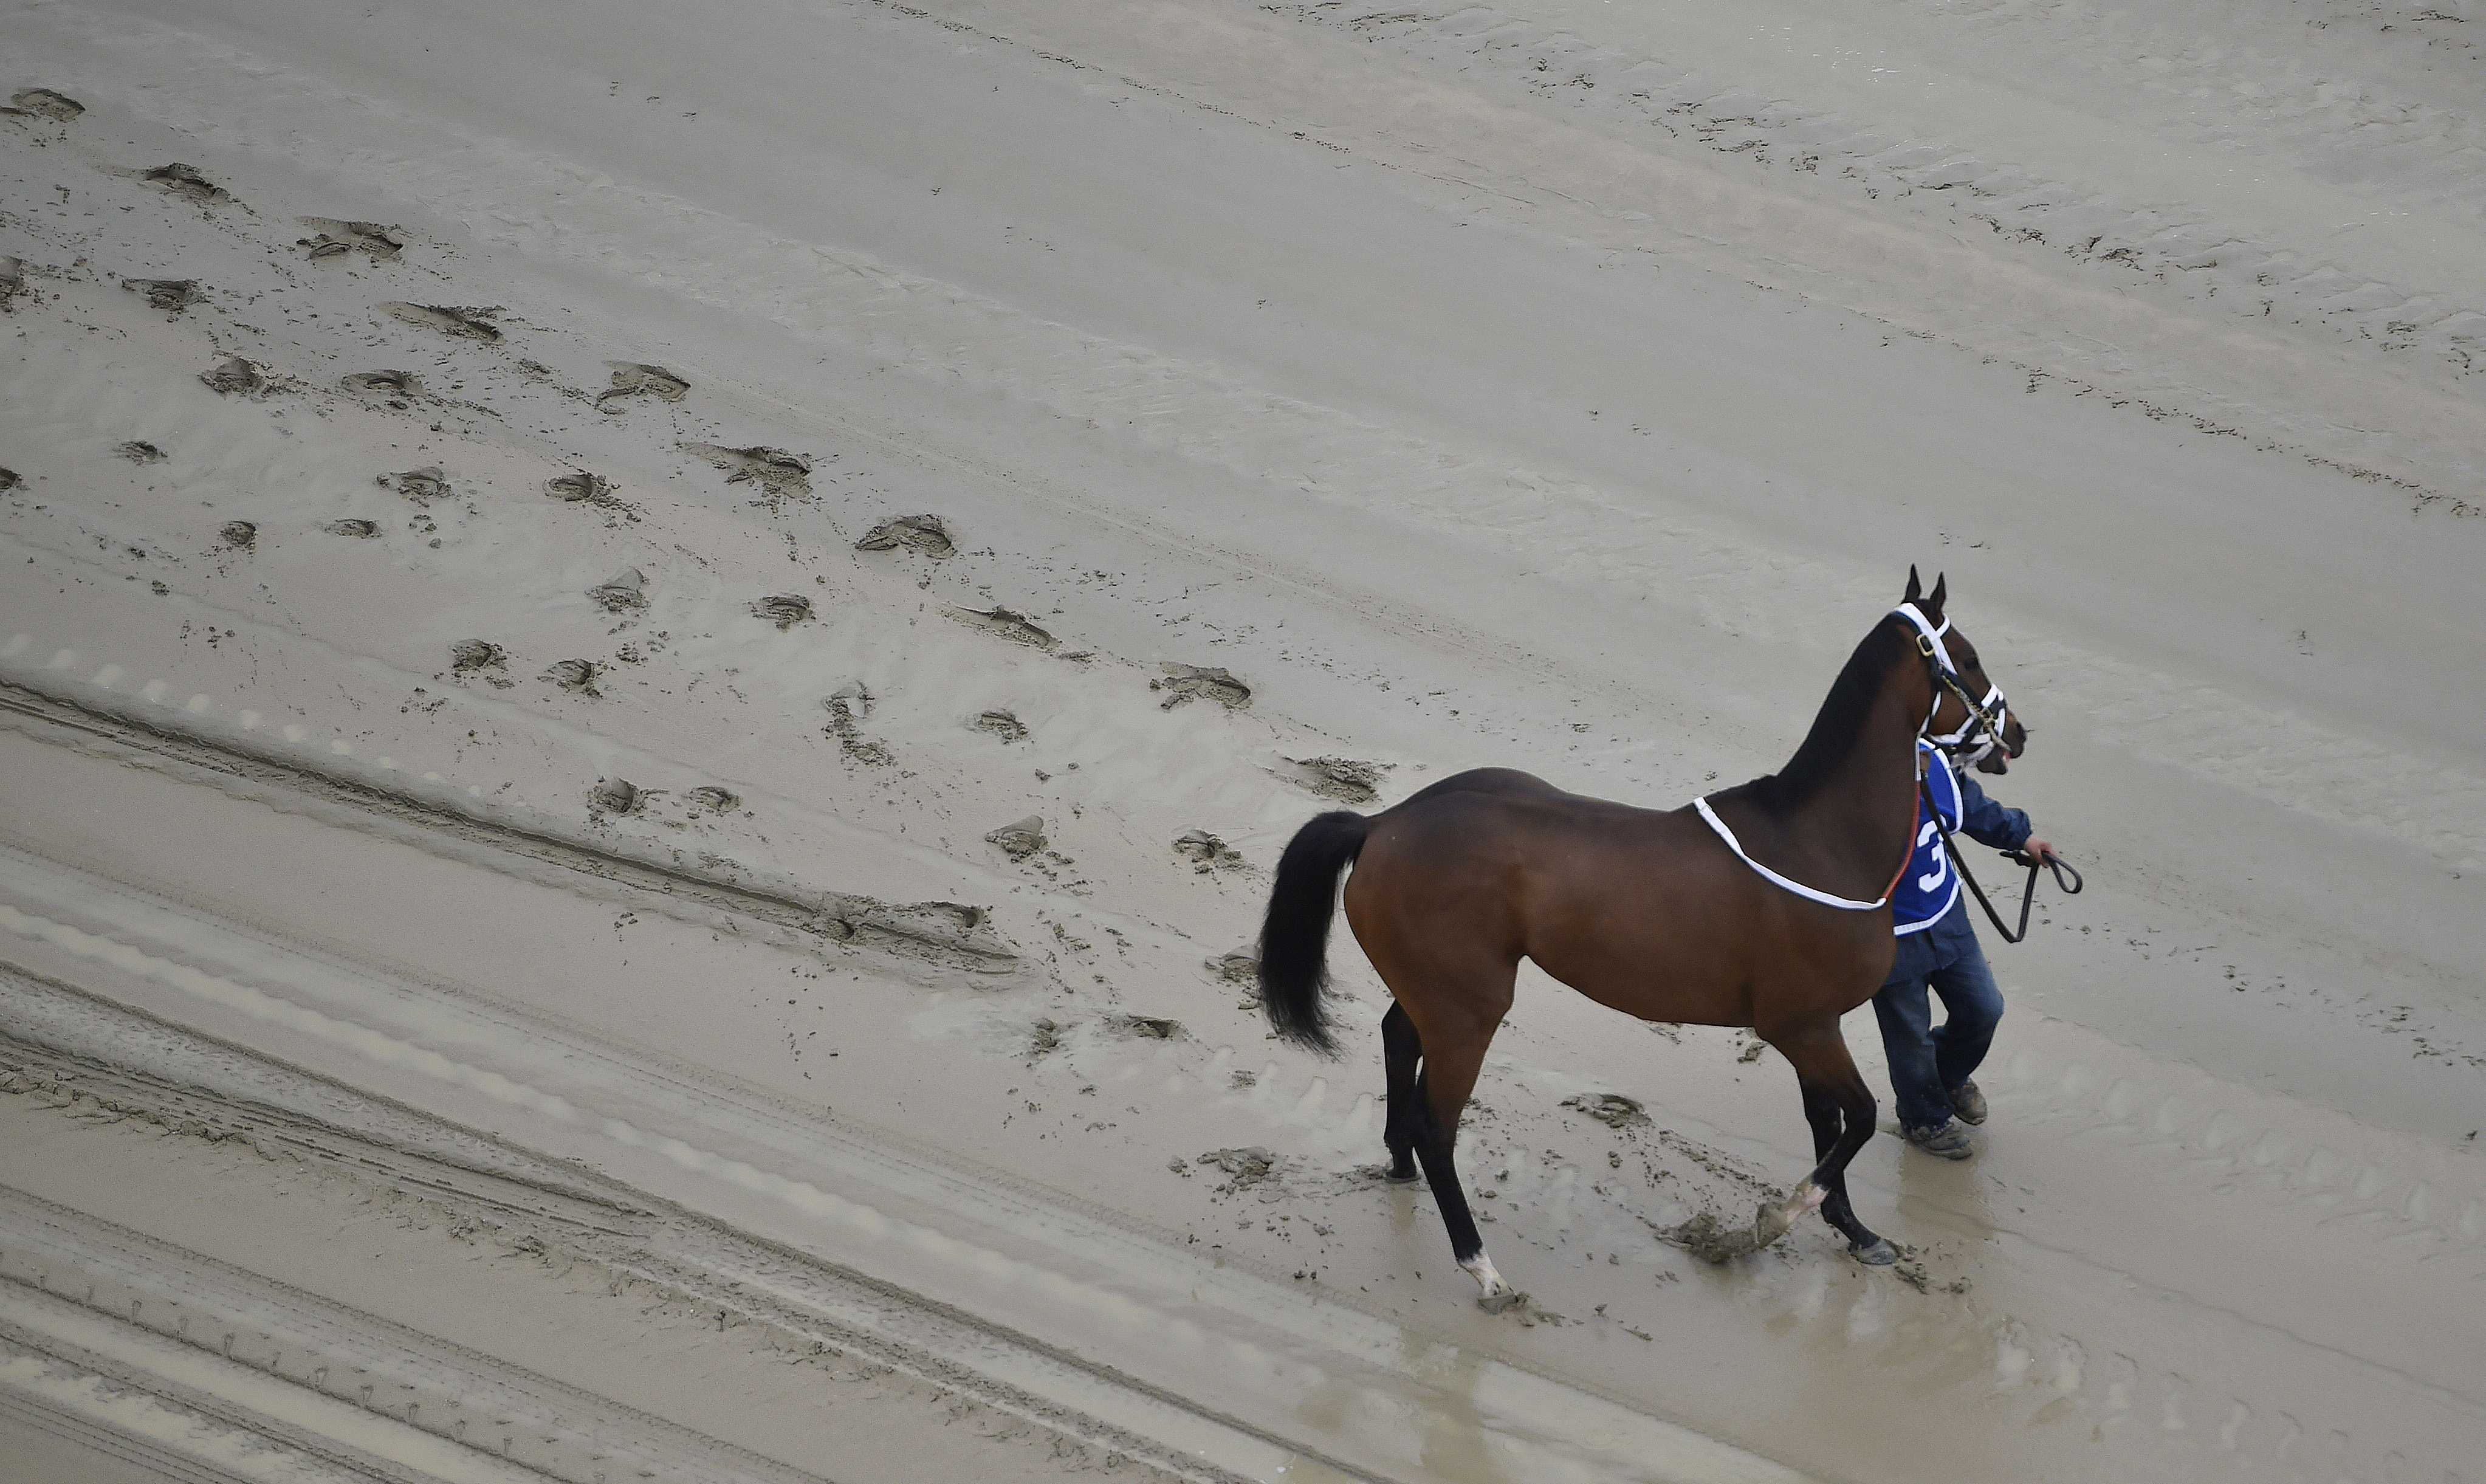 A hot walker moves down a muddy track with Homeboykris before the first horse race ahead of the 141st Preakness Stakes horse race at Pimlico Race Course in Baltimore, Md., on May 21, 2016.